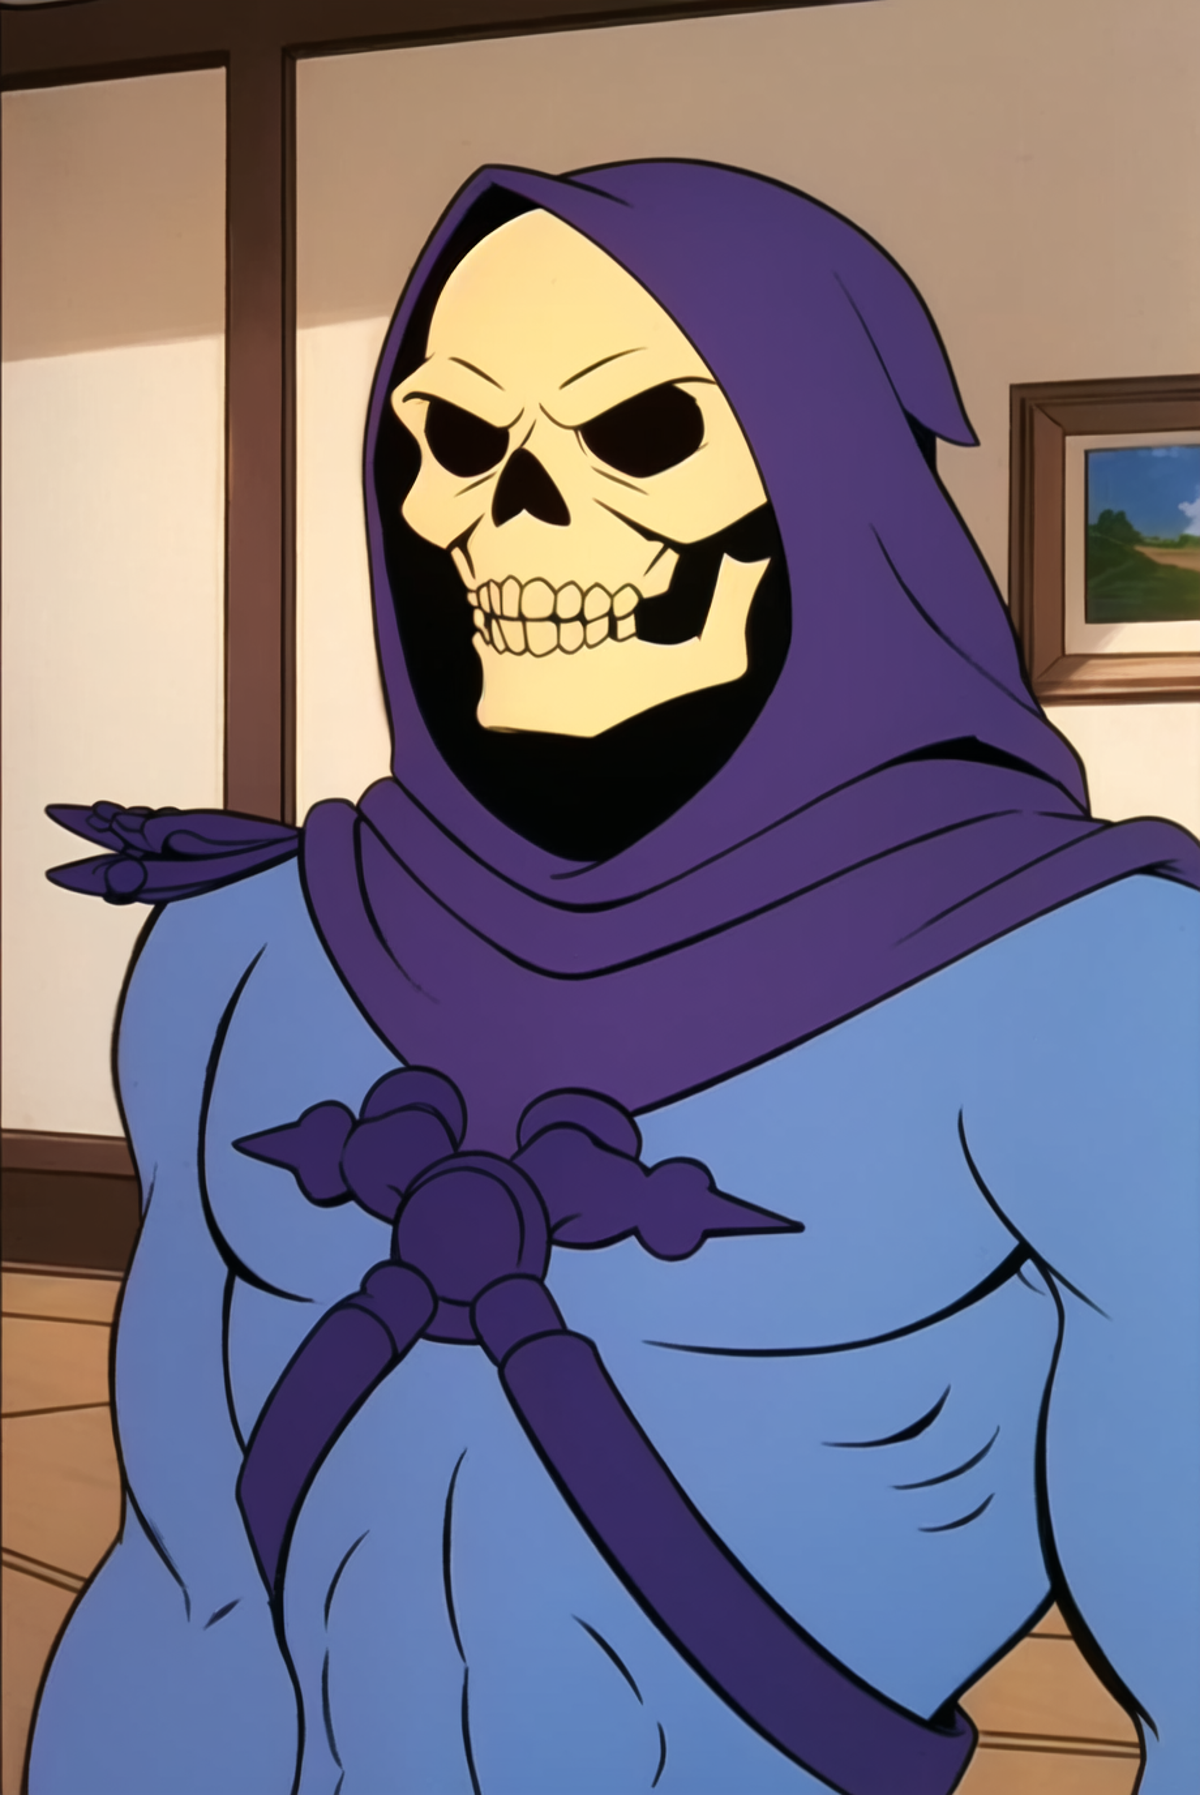 An animated skeleton warrior in a blue and purple robe with a scythe.